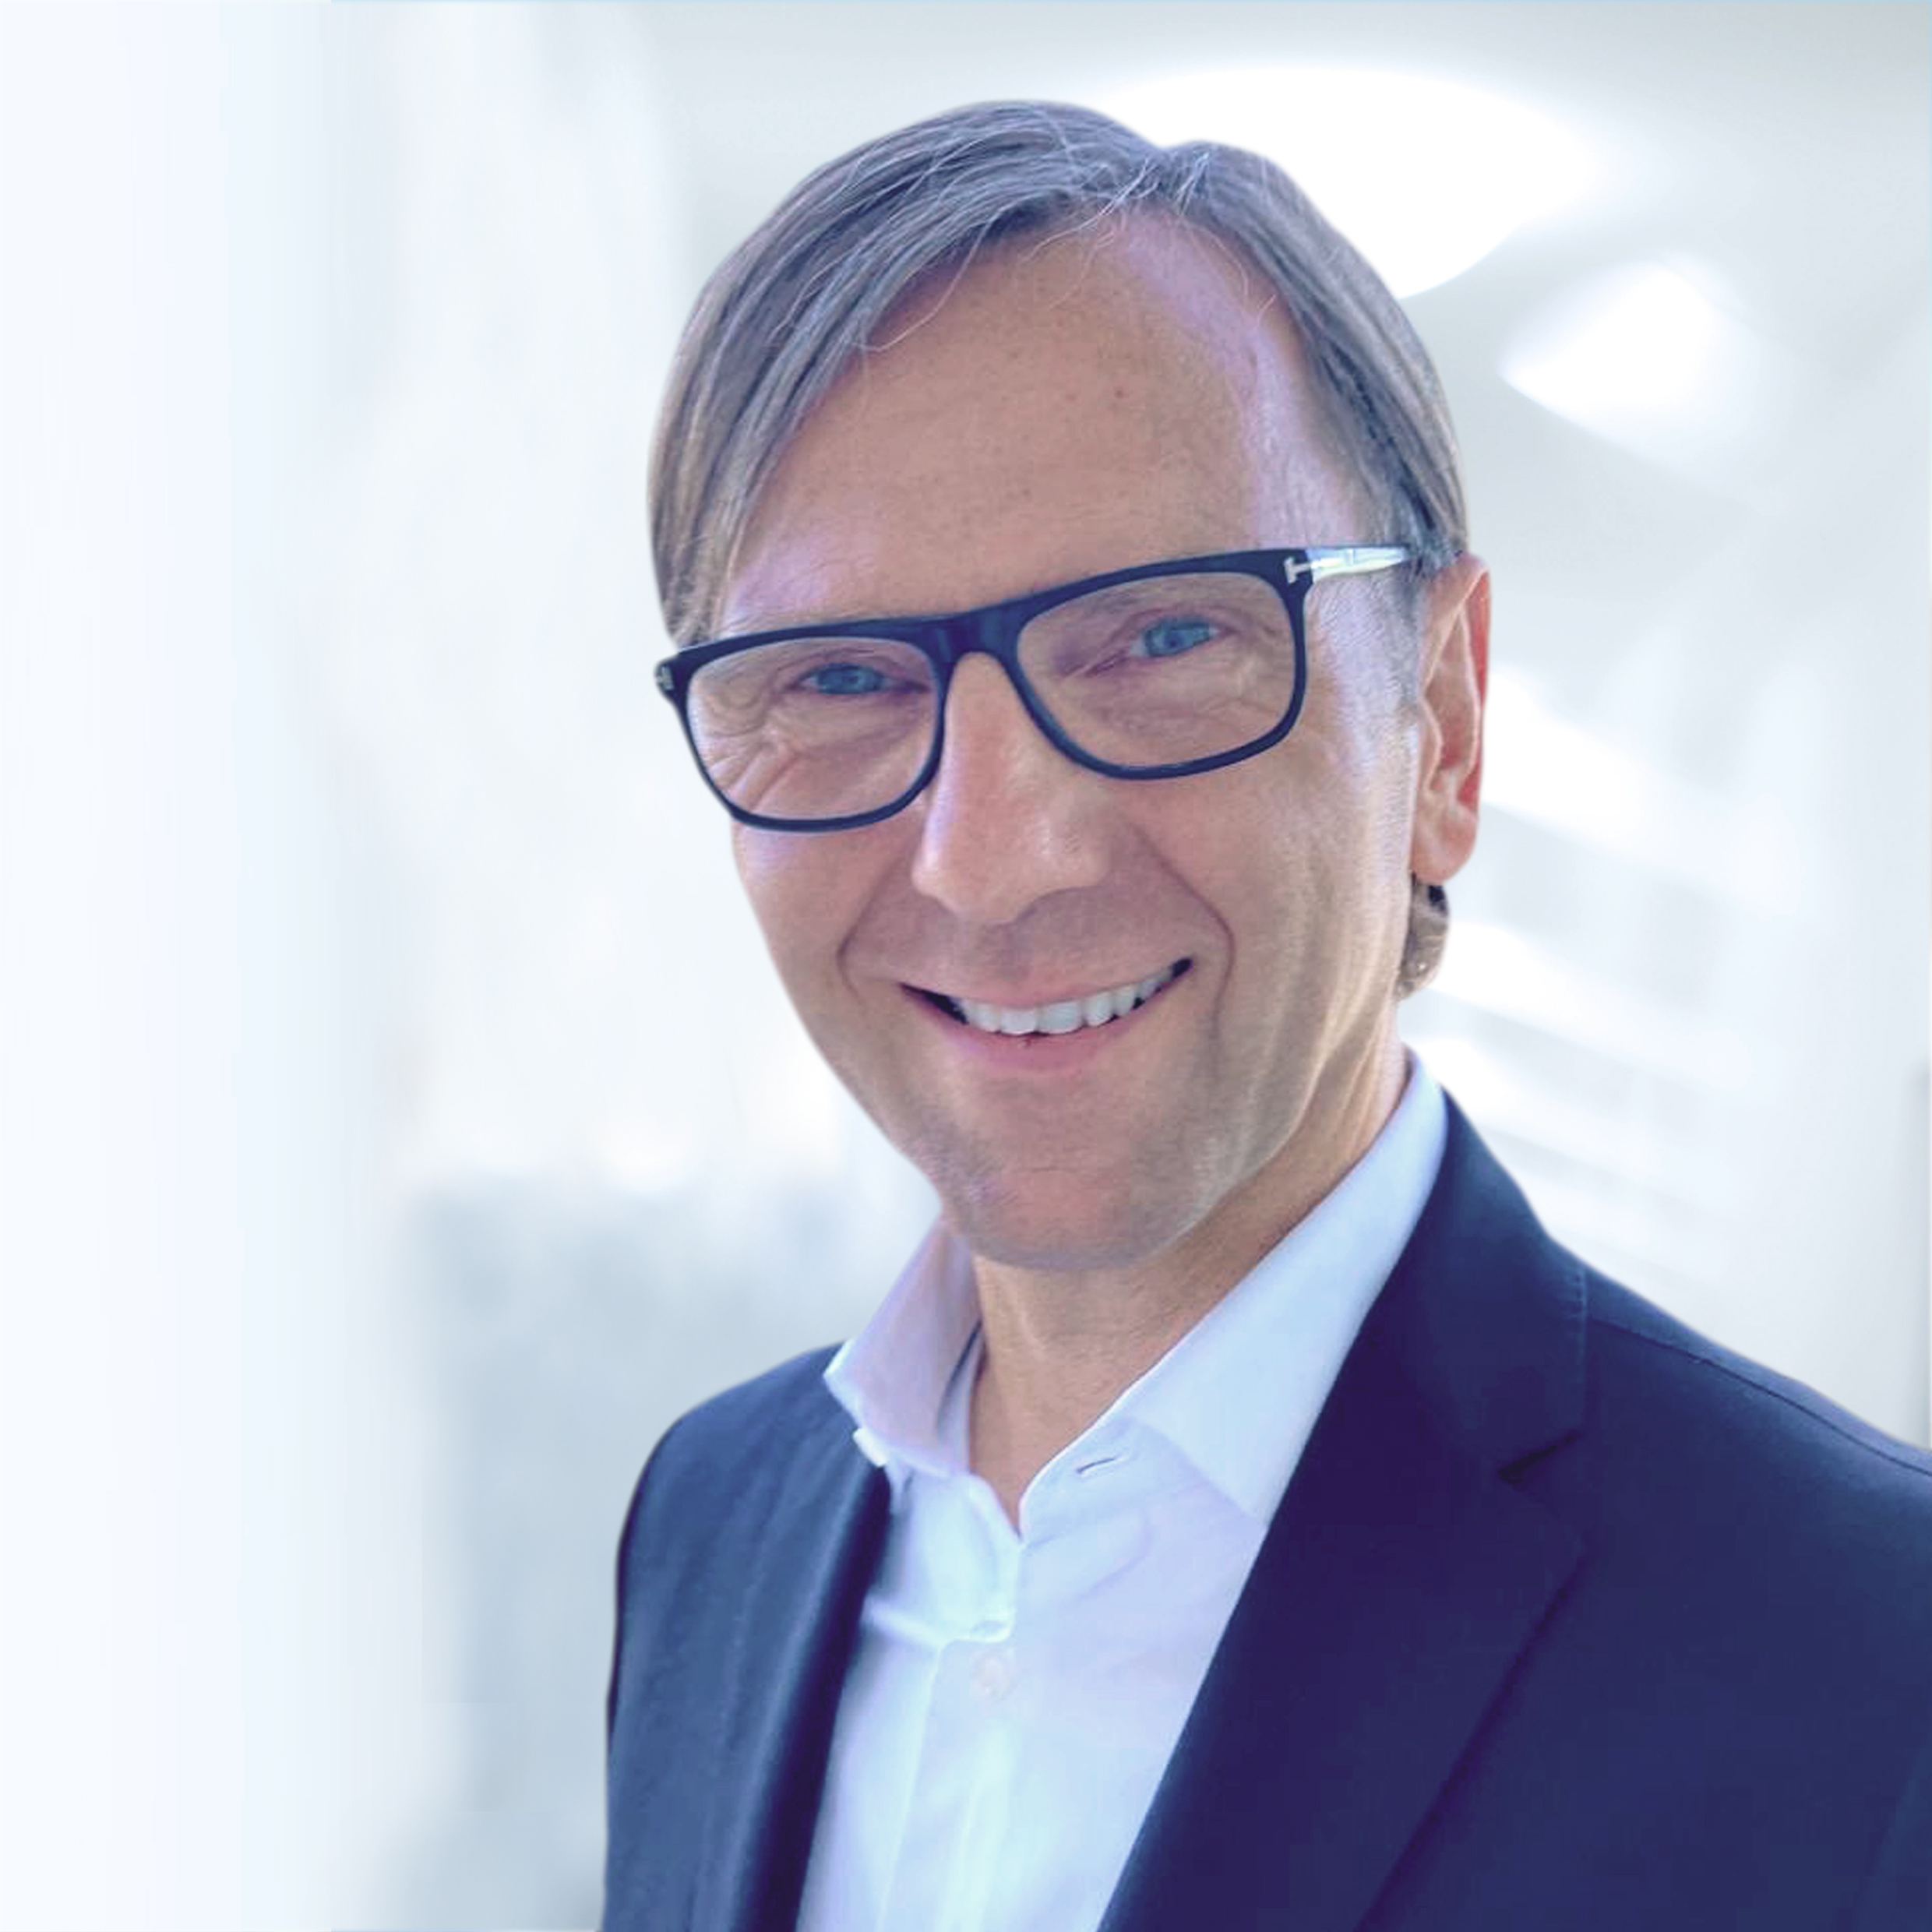 PROCAD taps Gerhard Knoch as new Managing Director